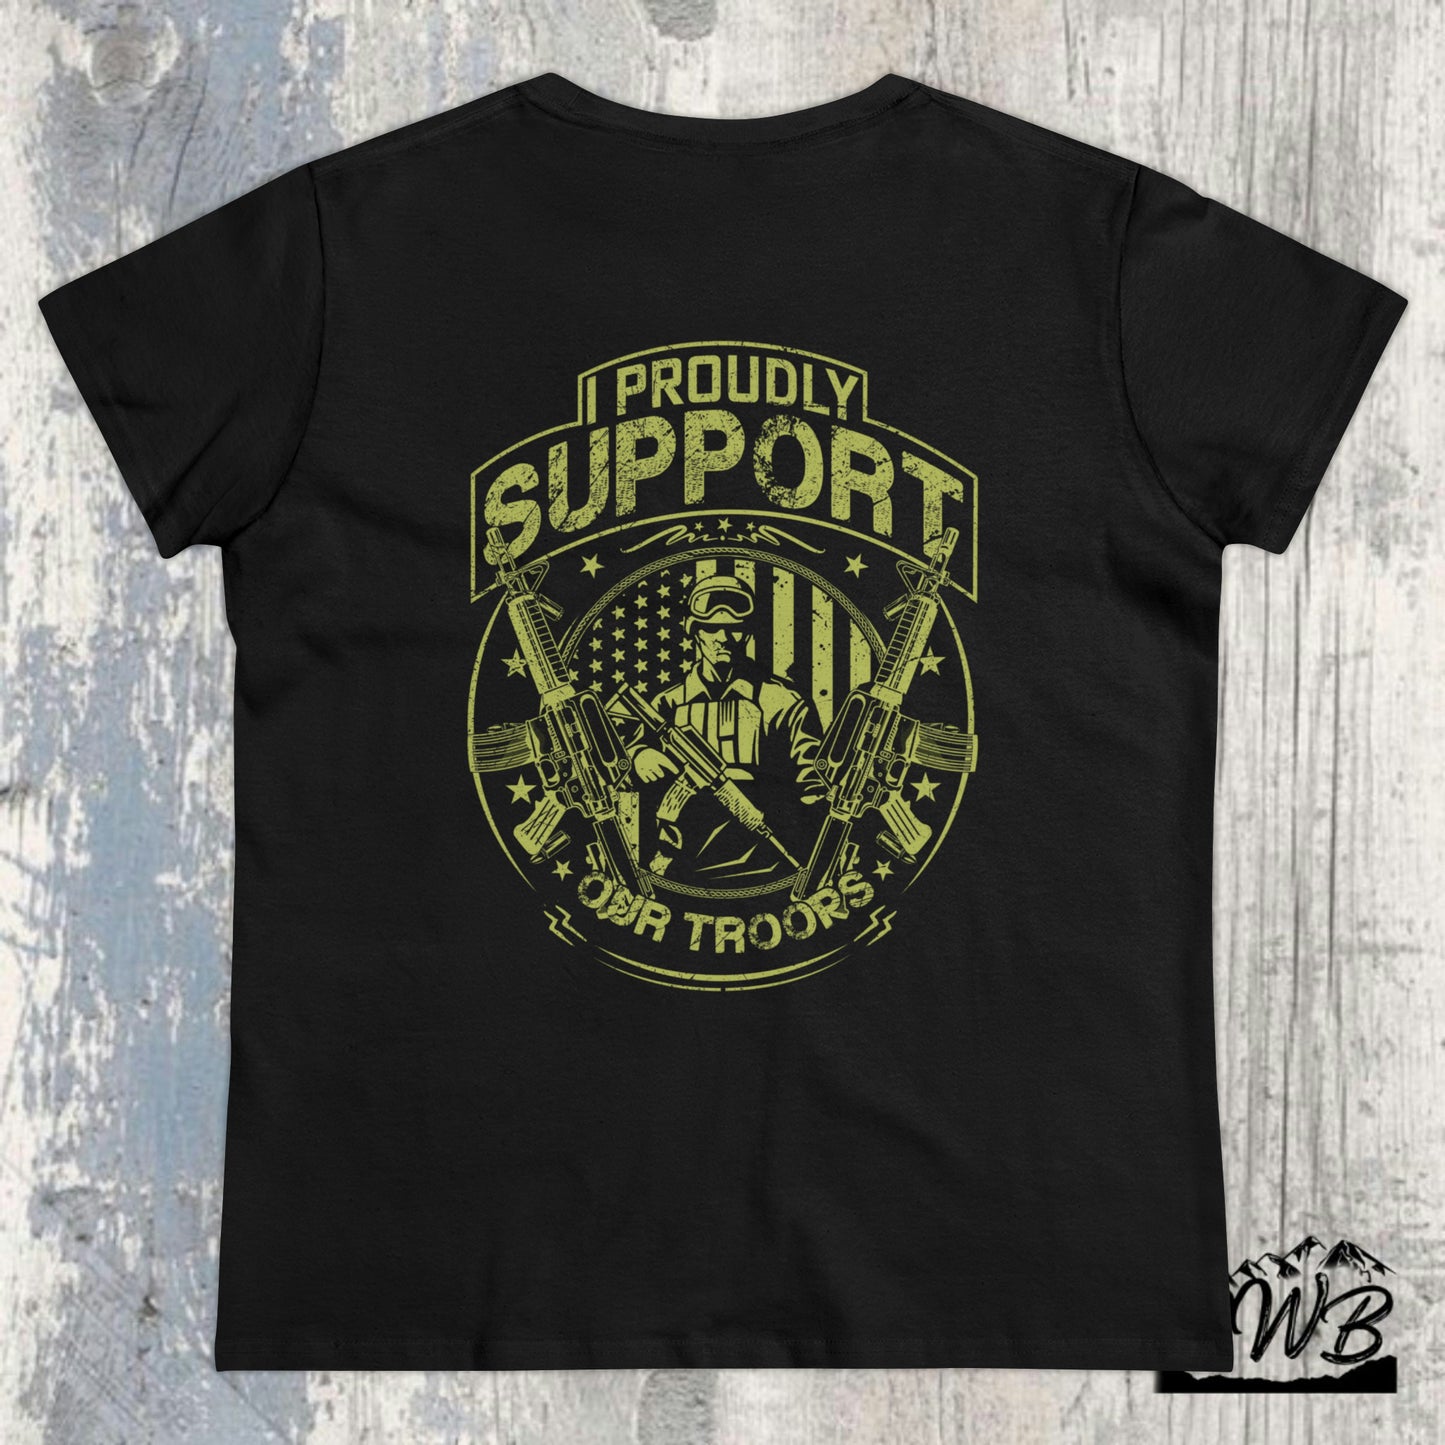 I Proudly Support Our Troops Women's Tee - Black